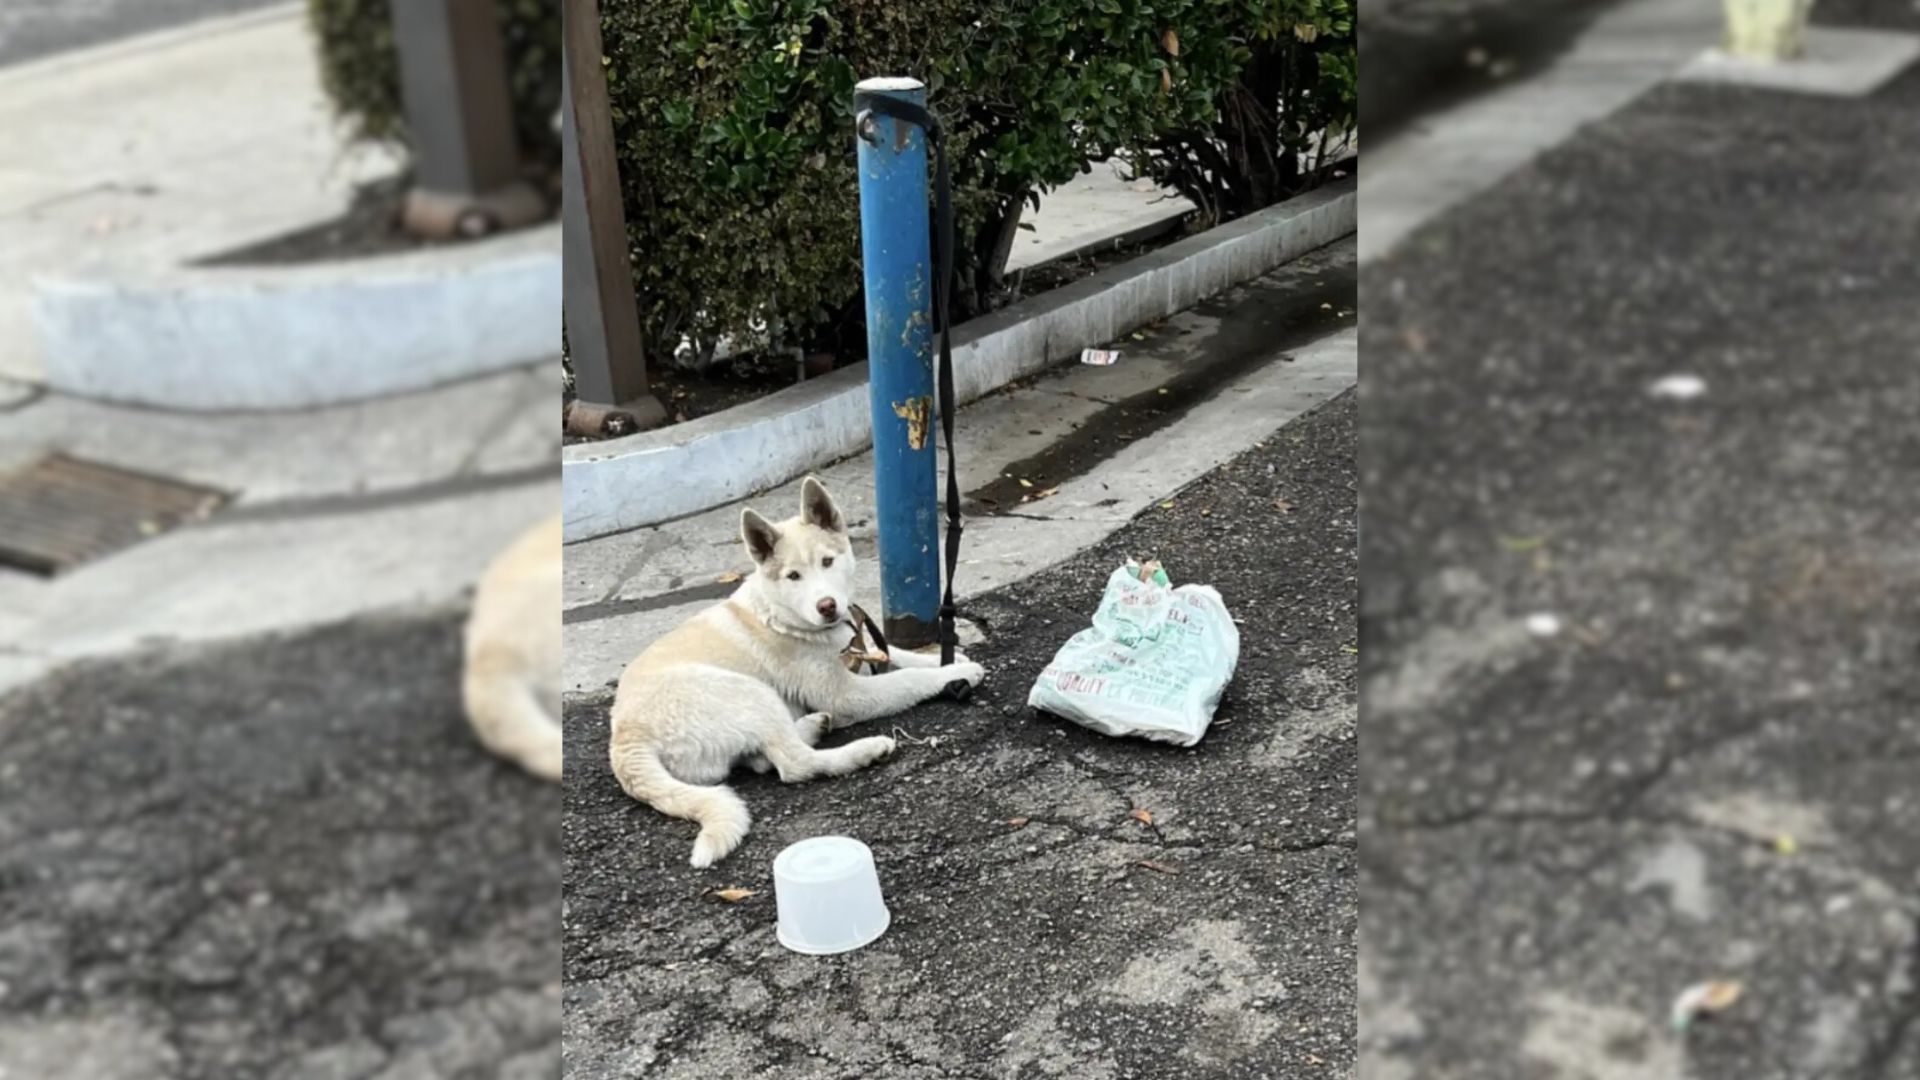 Gorgeous White Puppy Was Tied To Pole For Days Until Kind-Hearted People Saved Him